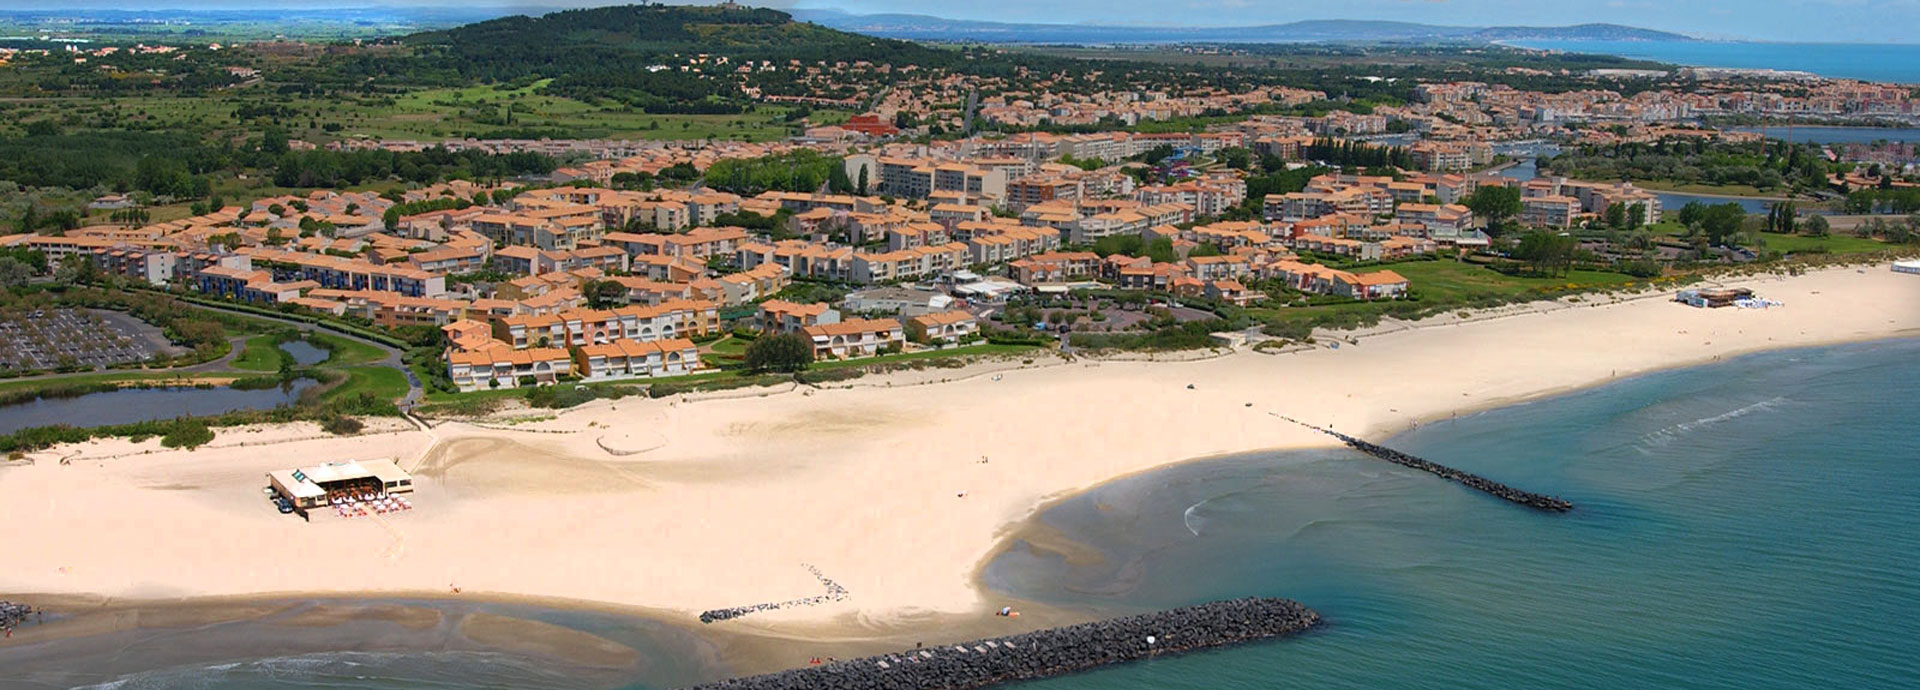 Le Cap d'Agde in Languedoc-Roussillon: affitto case vacanza nell'Hérault